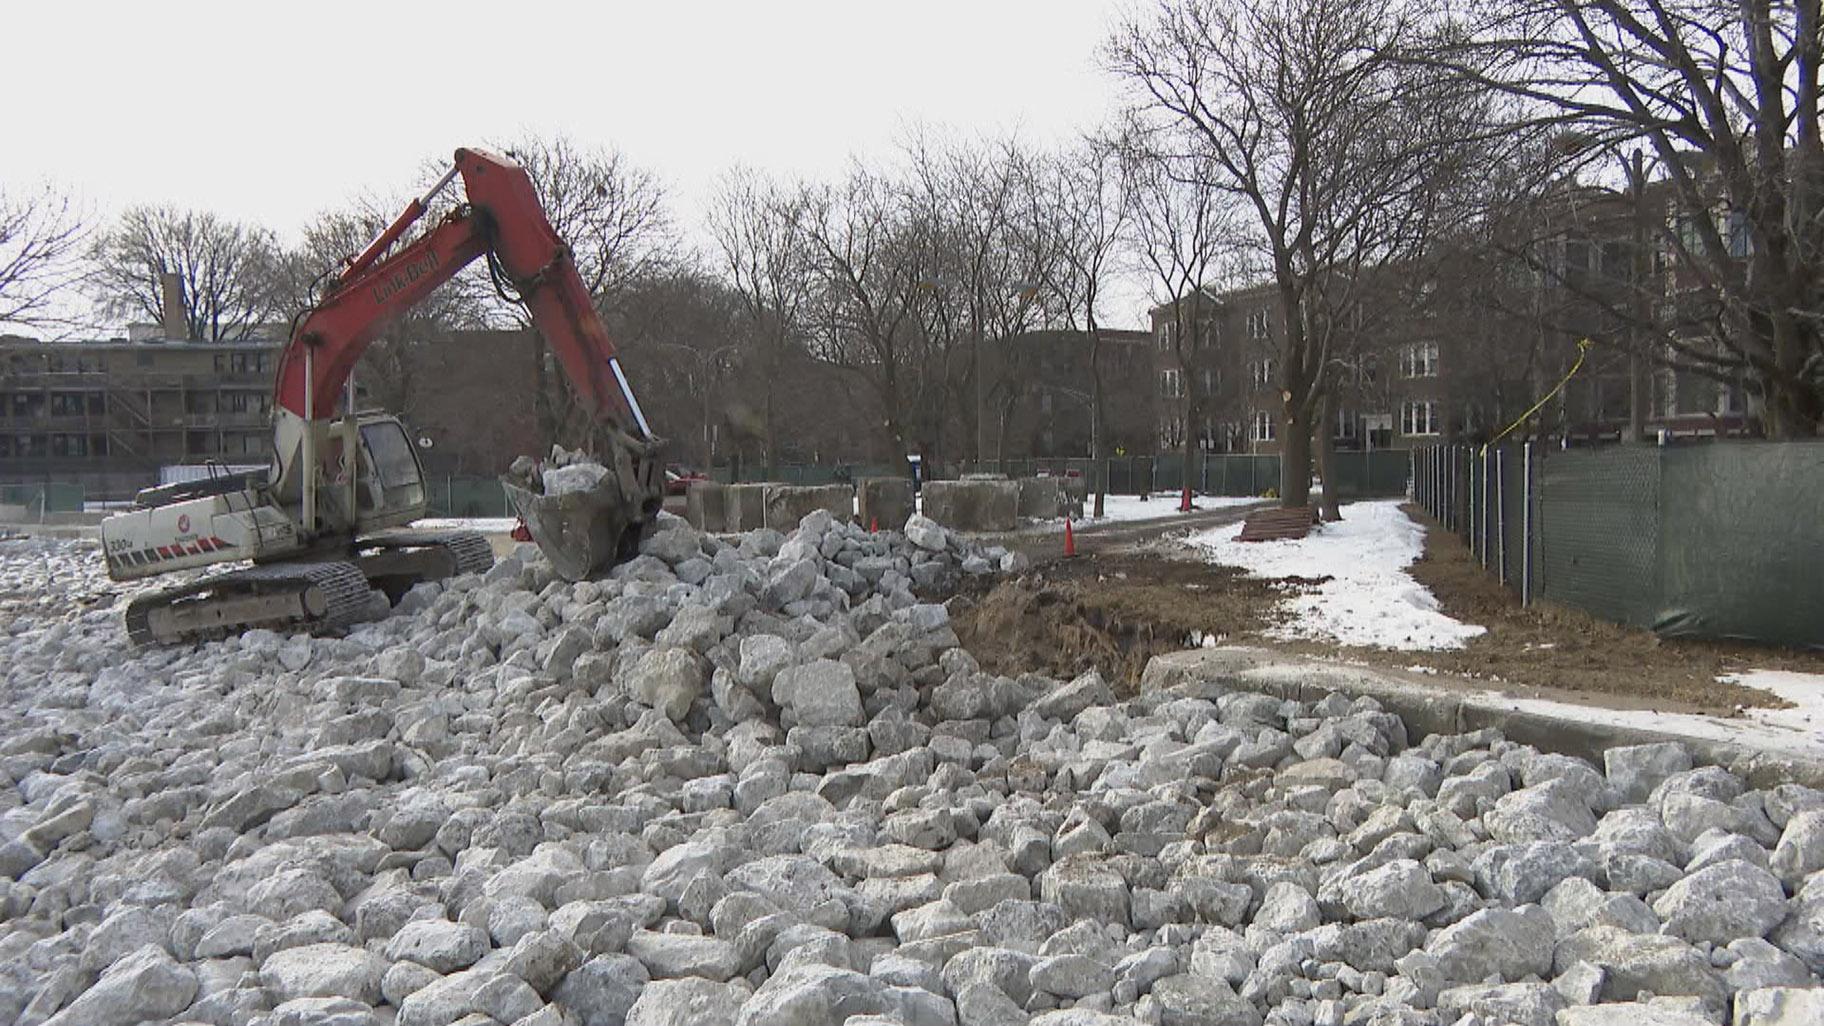 Boulders have replaced beaches in some places along the lakefront as part of the city’s efforts to mitigate shoreline damage. (WTTW News)